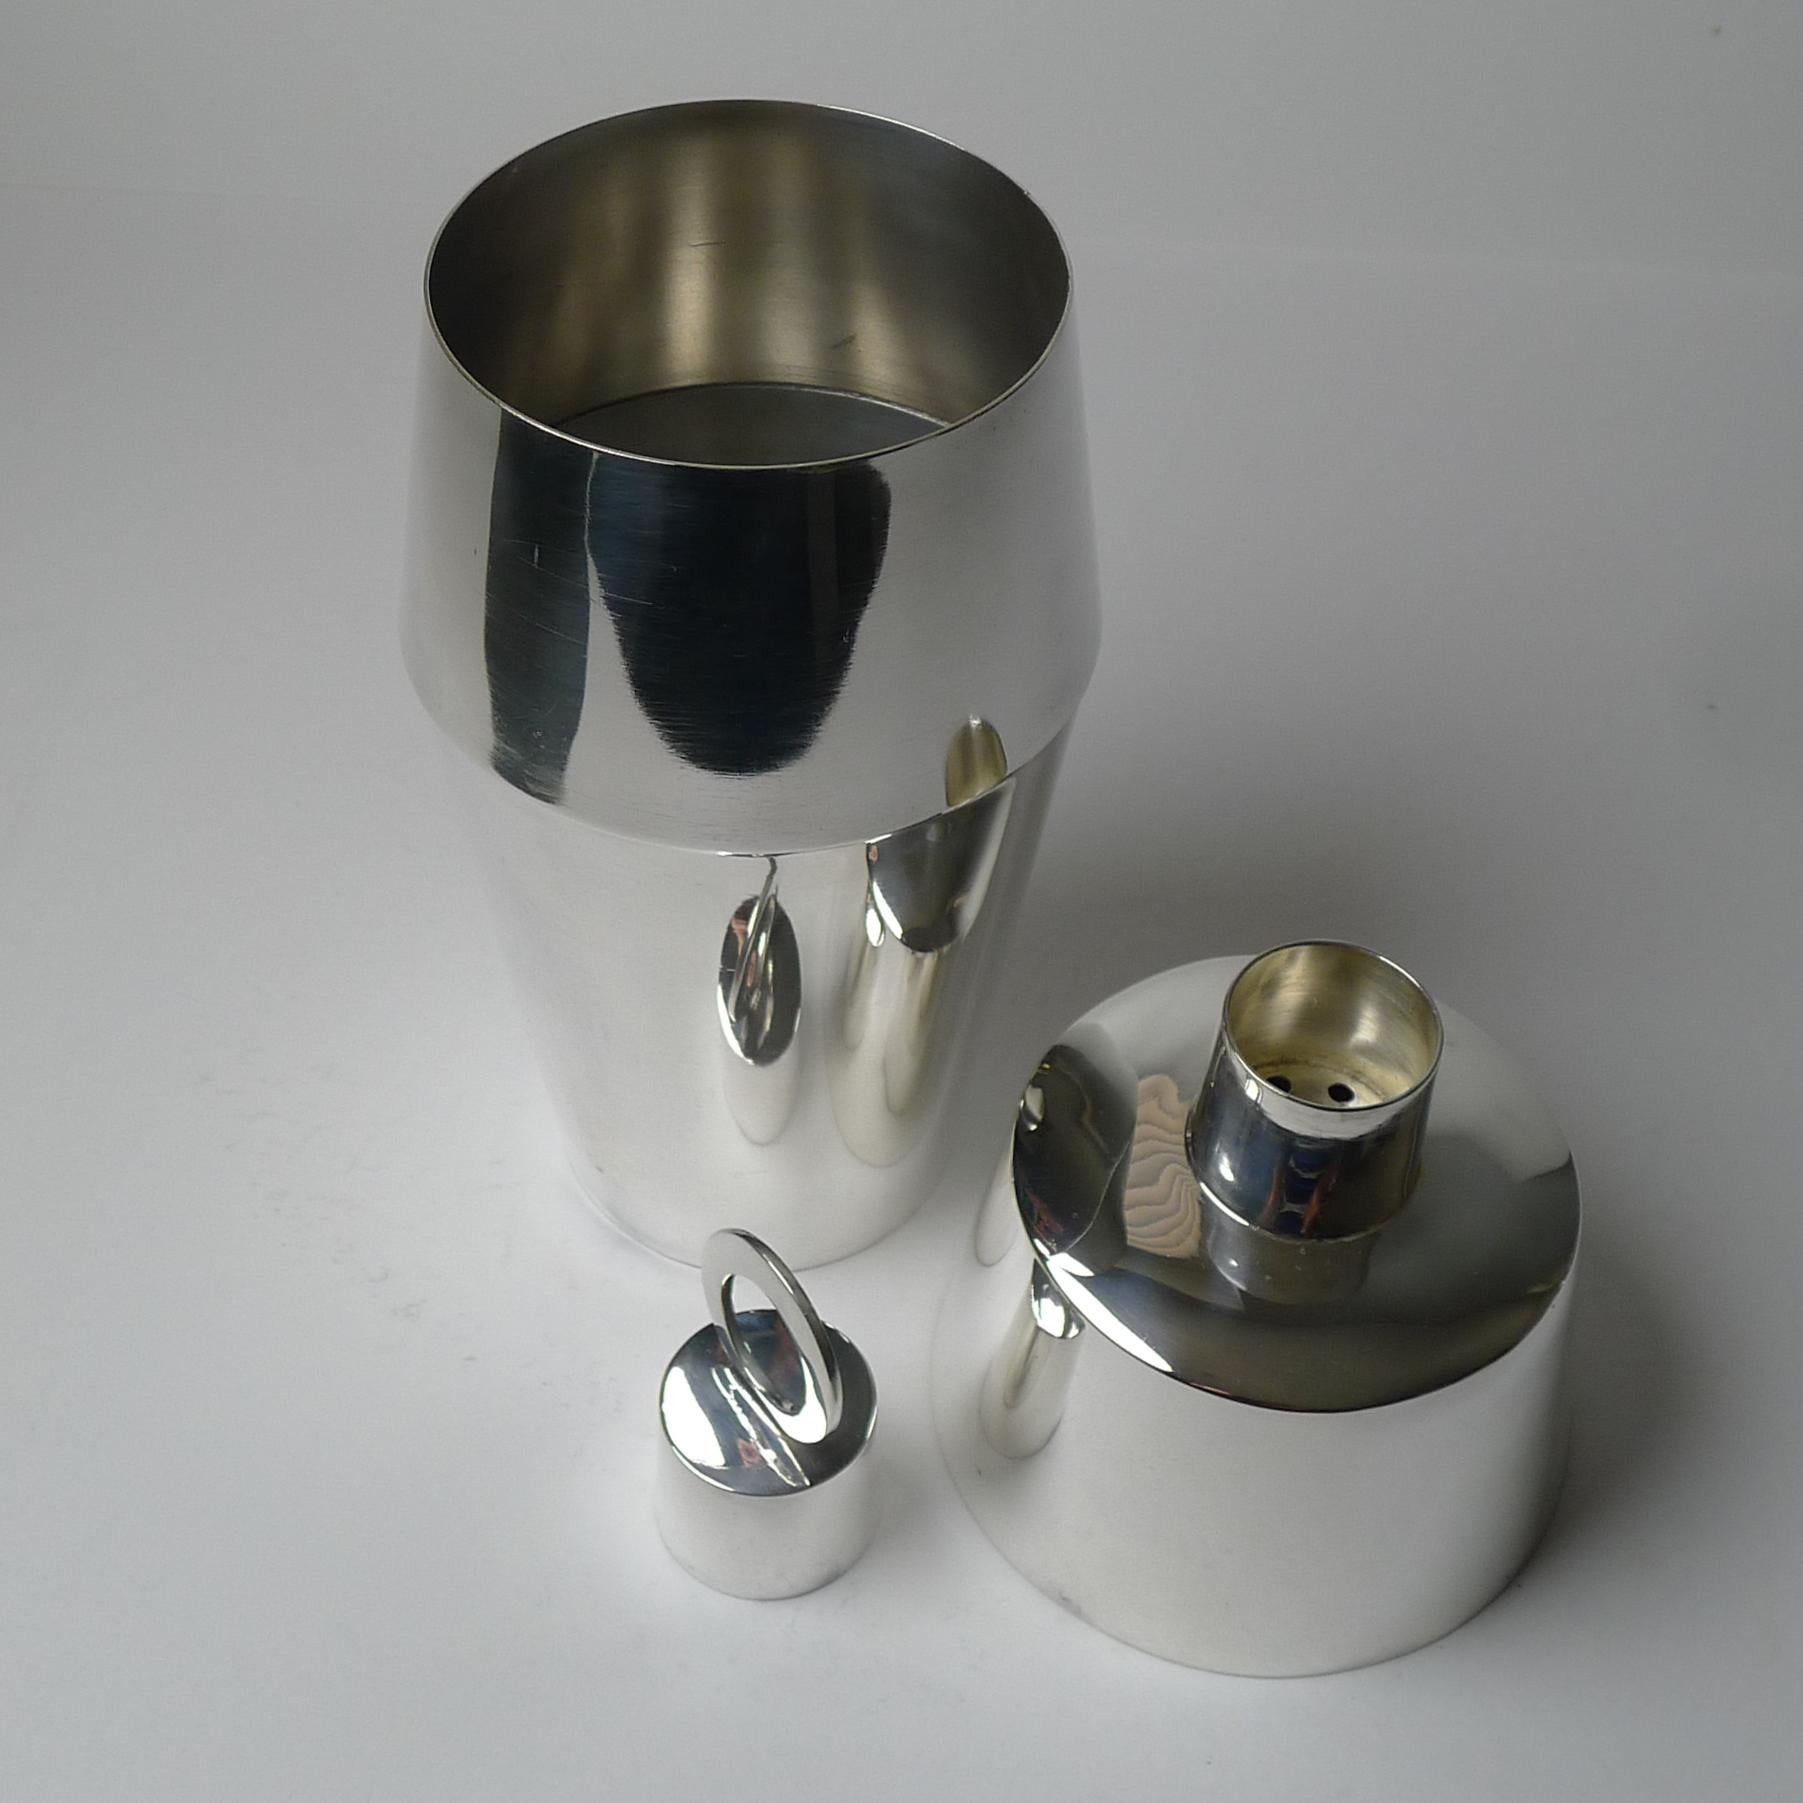 Stylish Art Deco Silver Plated Cocktail Shaker by William Hutton In Good Condition For Sale In Bath, GB